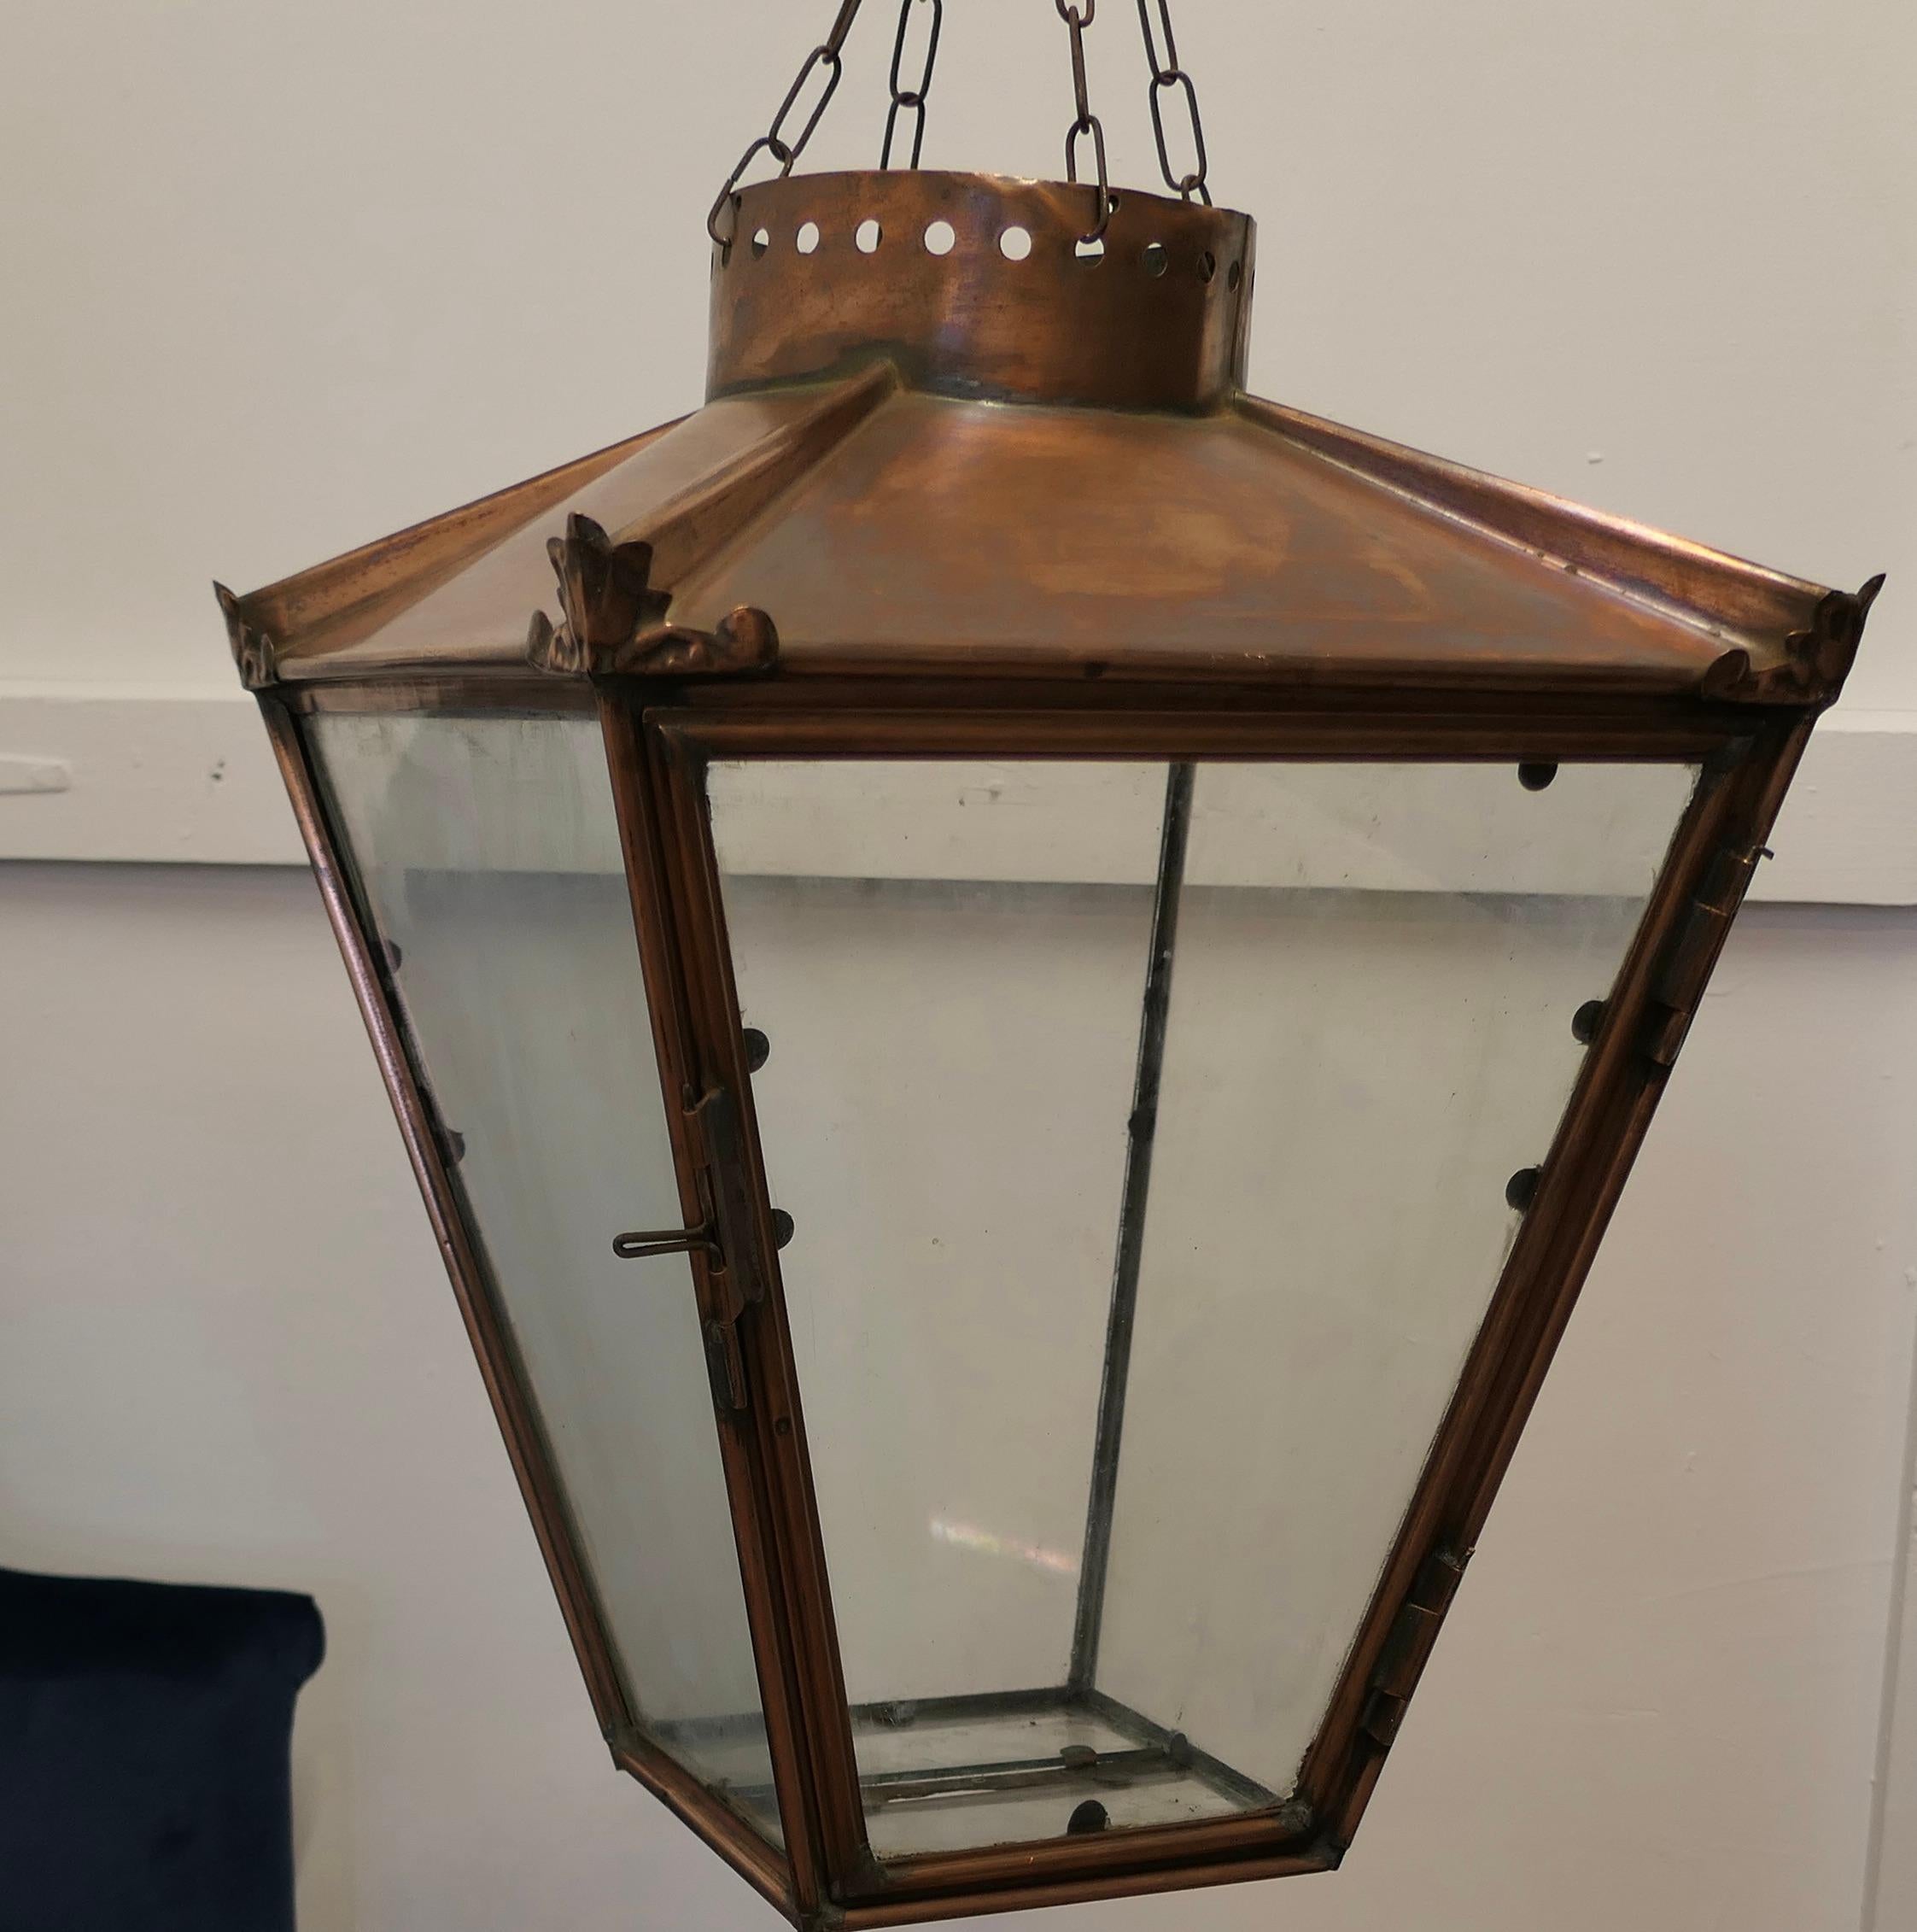 Large Copper Hanging Lantern Lampshade In Good Condition For Sale In Chillerton, Isle of Wight